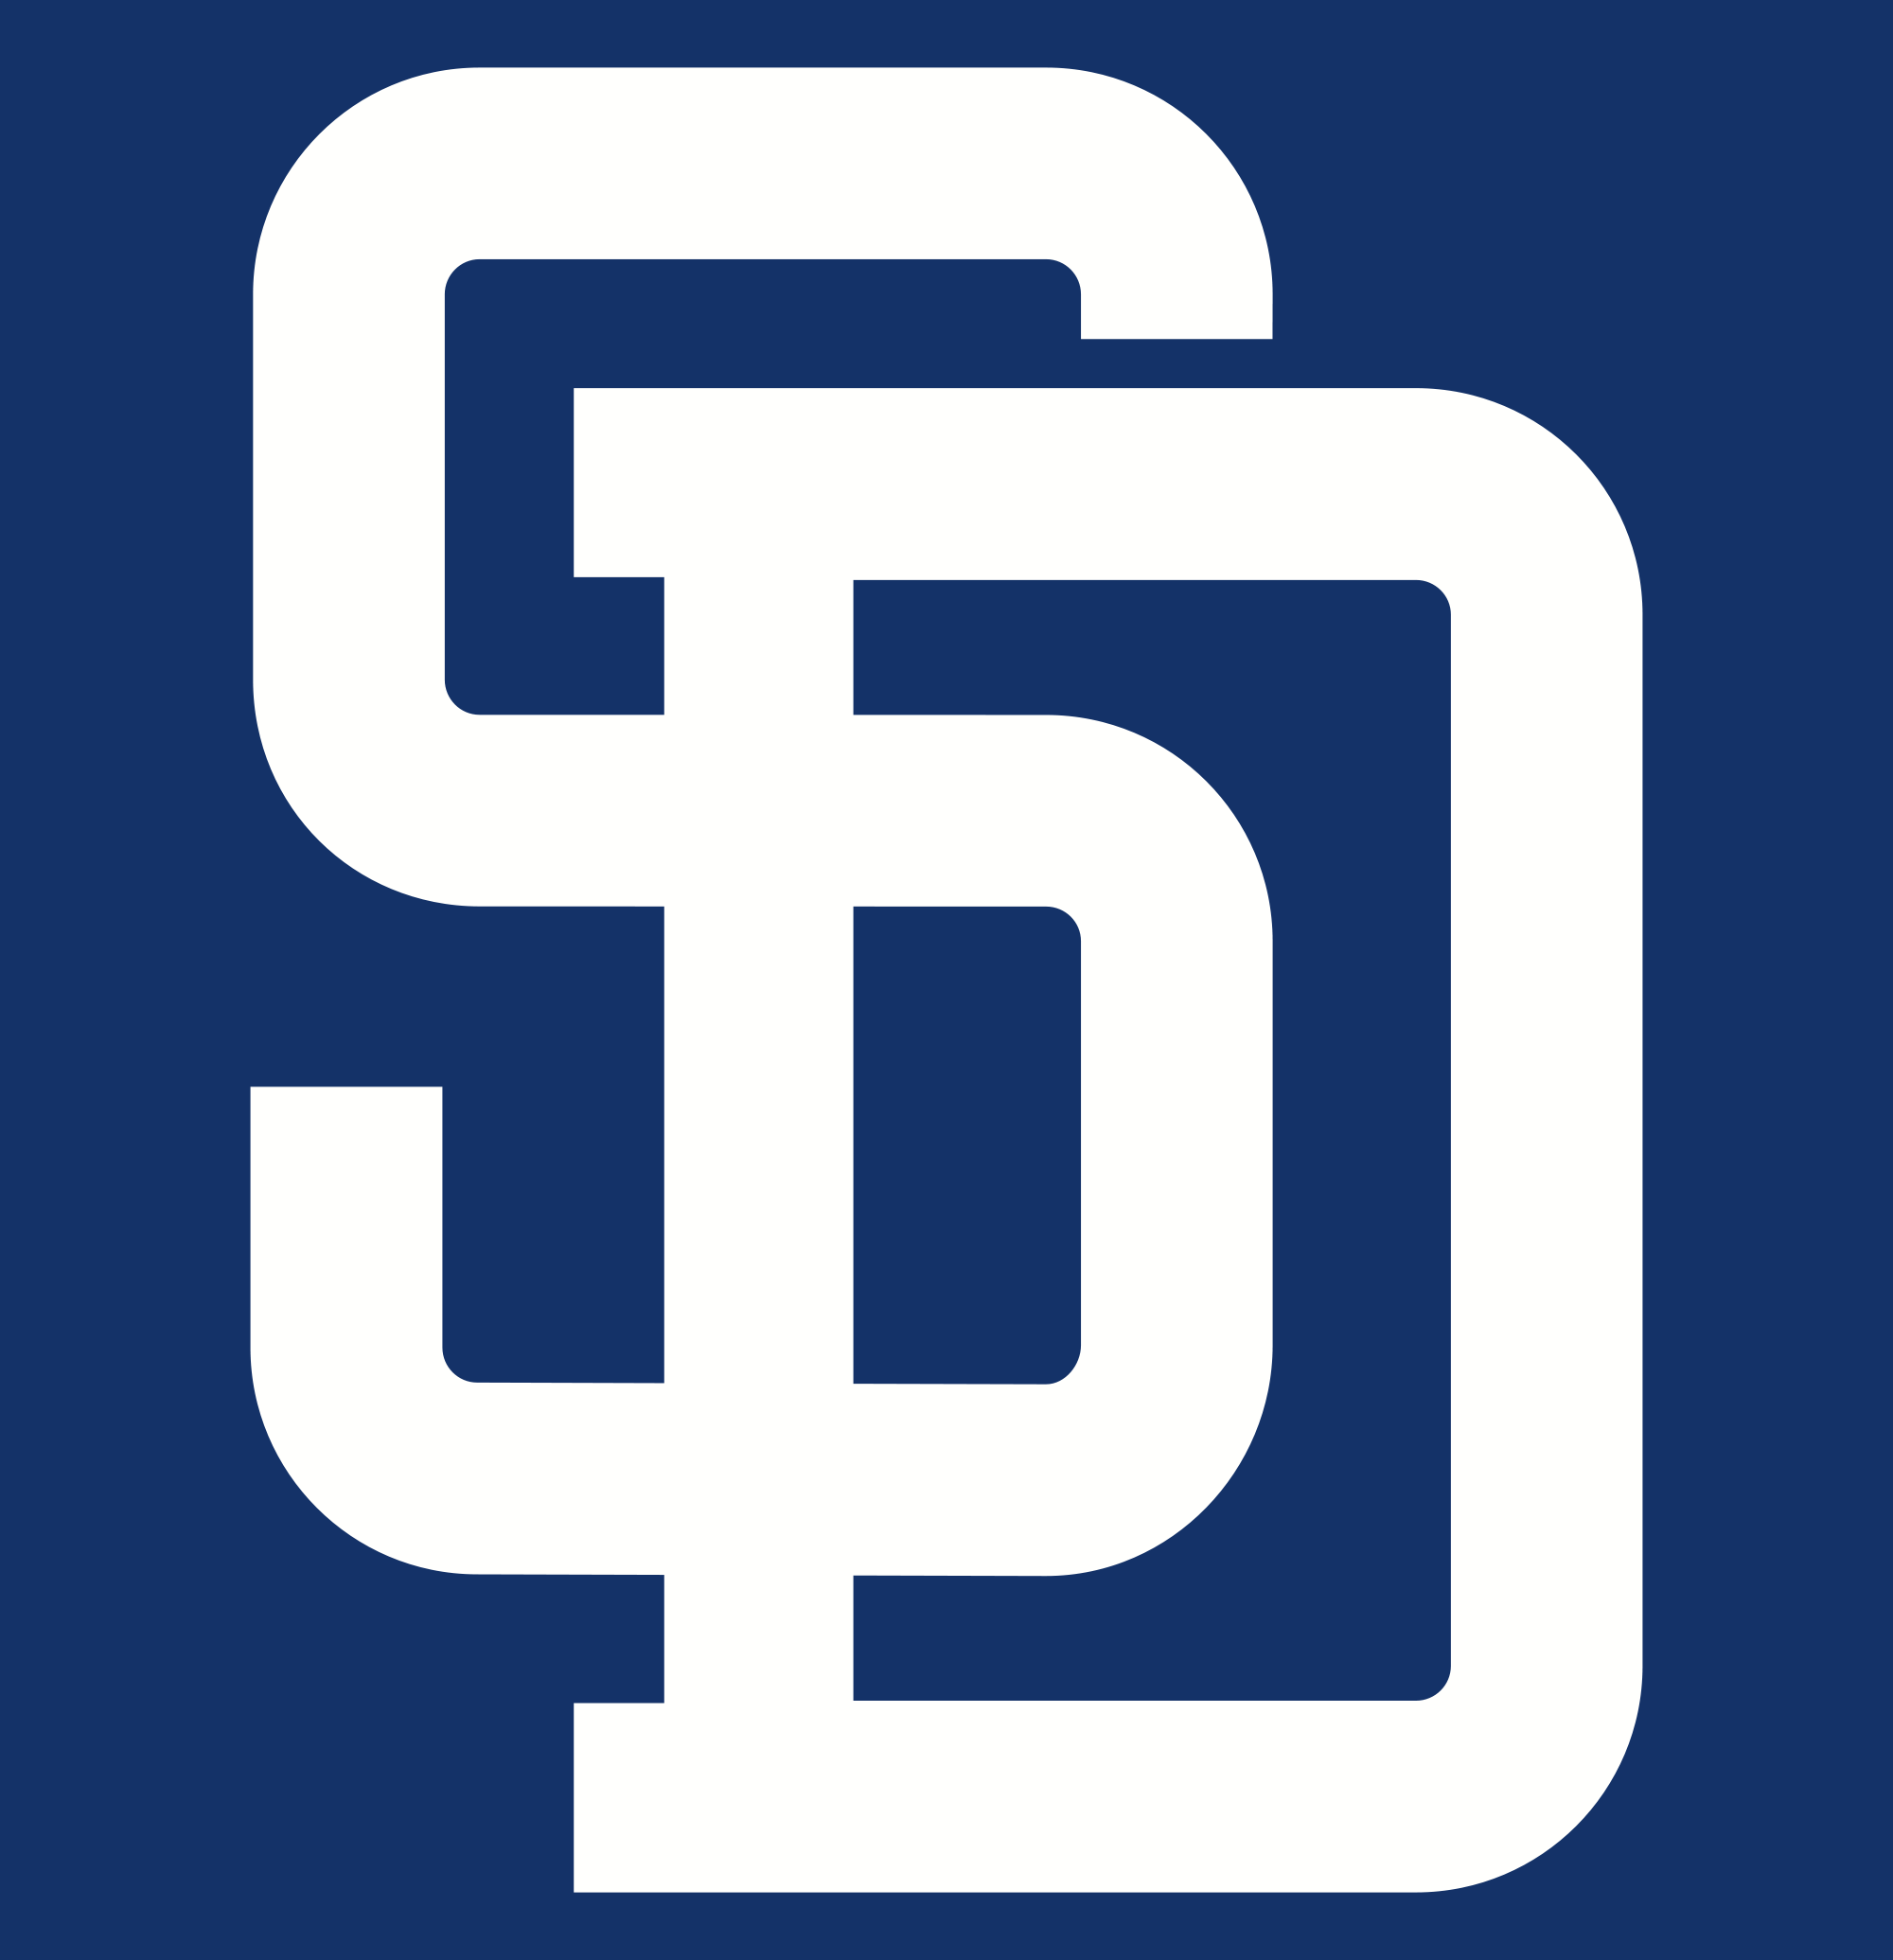 San Diego Padres 2018 Prospects